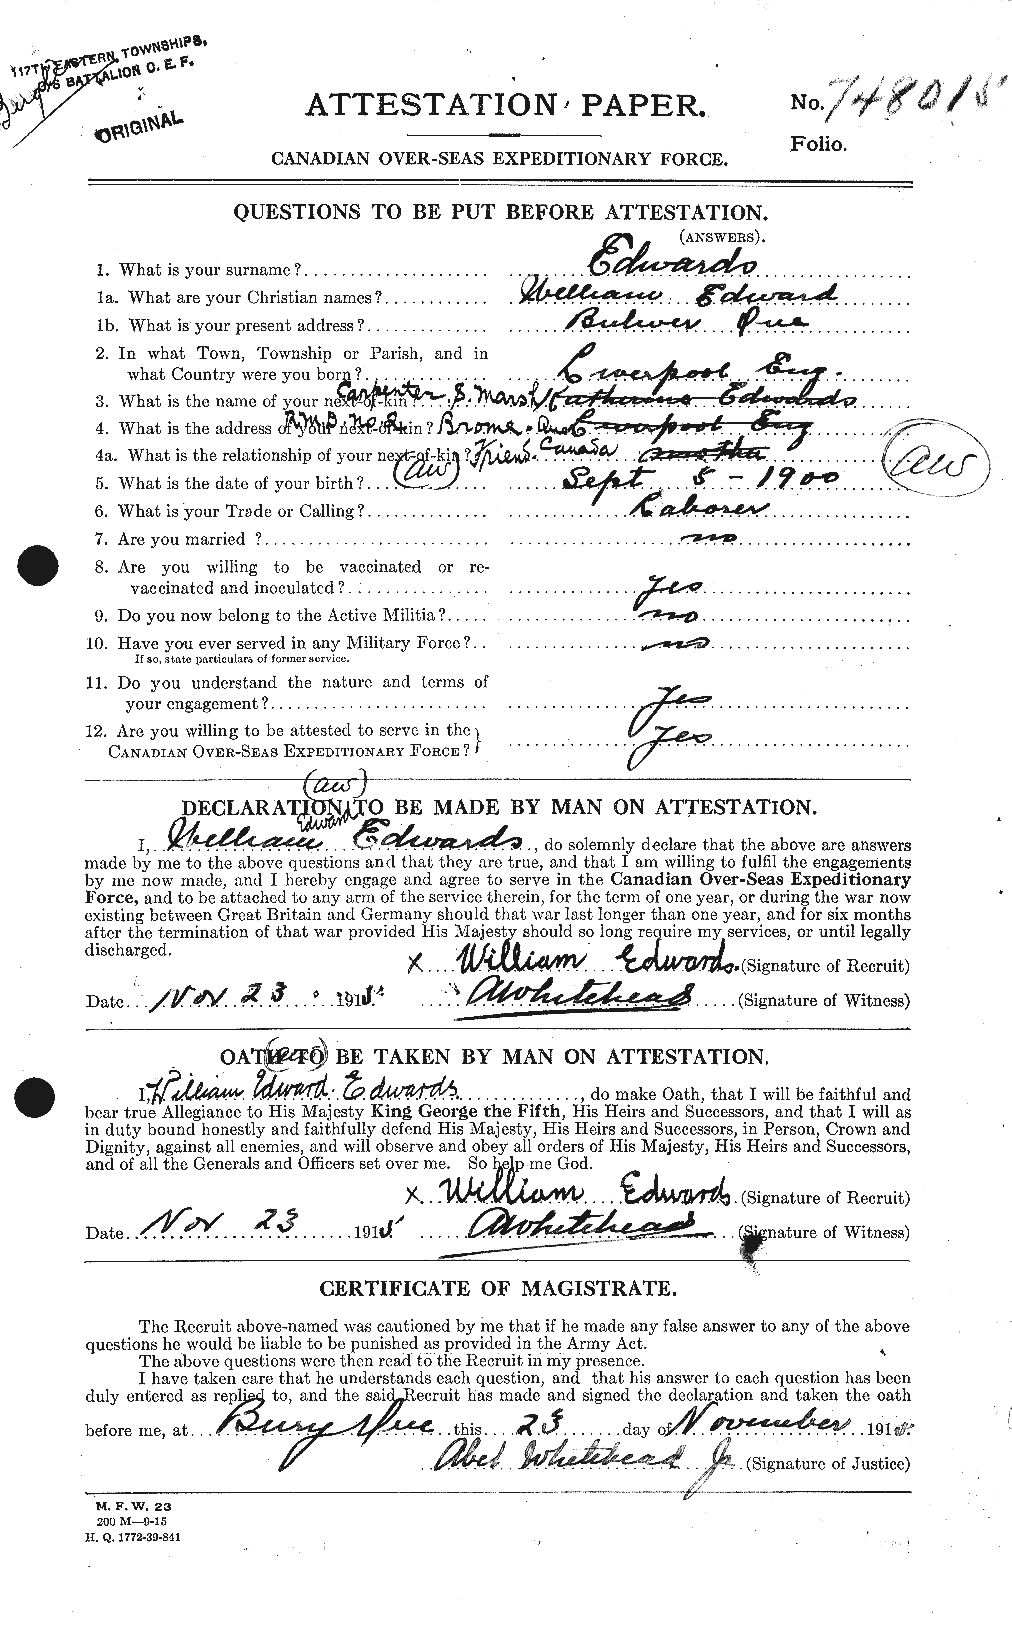 Personnel Records of the First World War - CEF 310421a